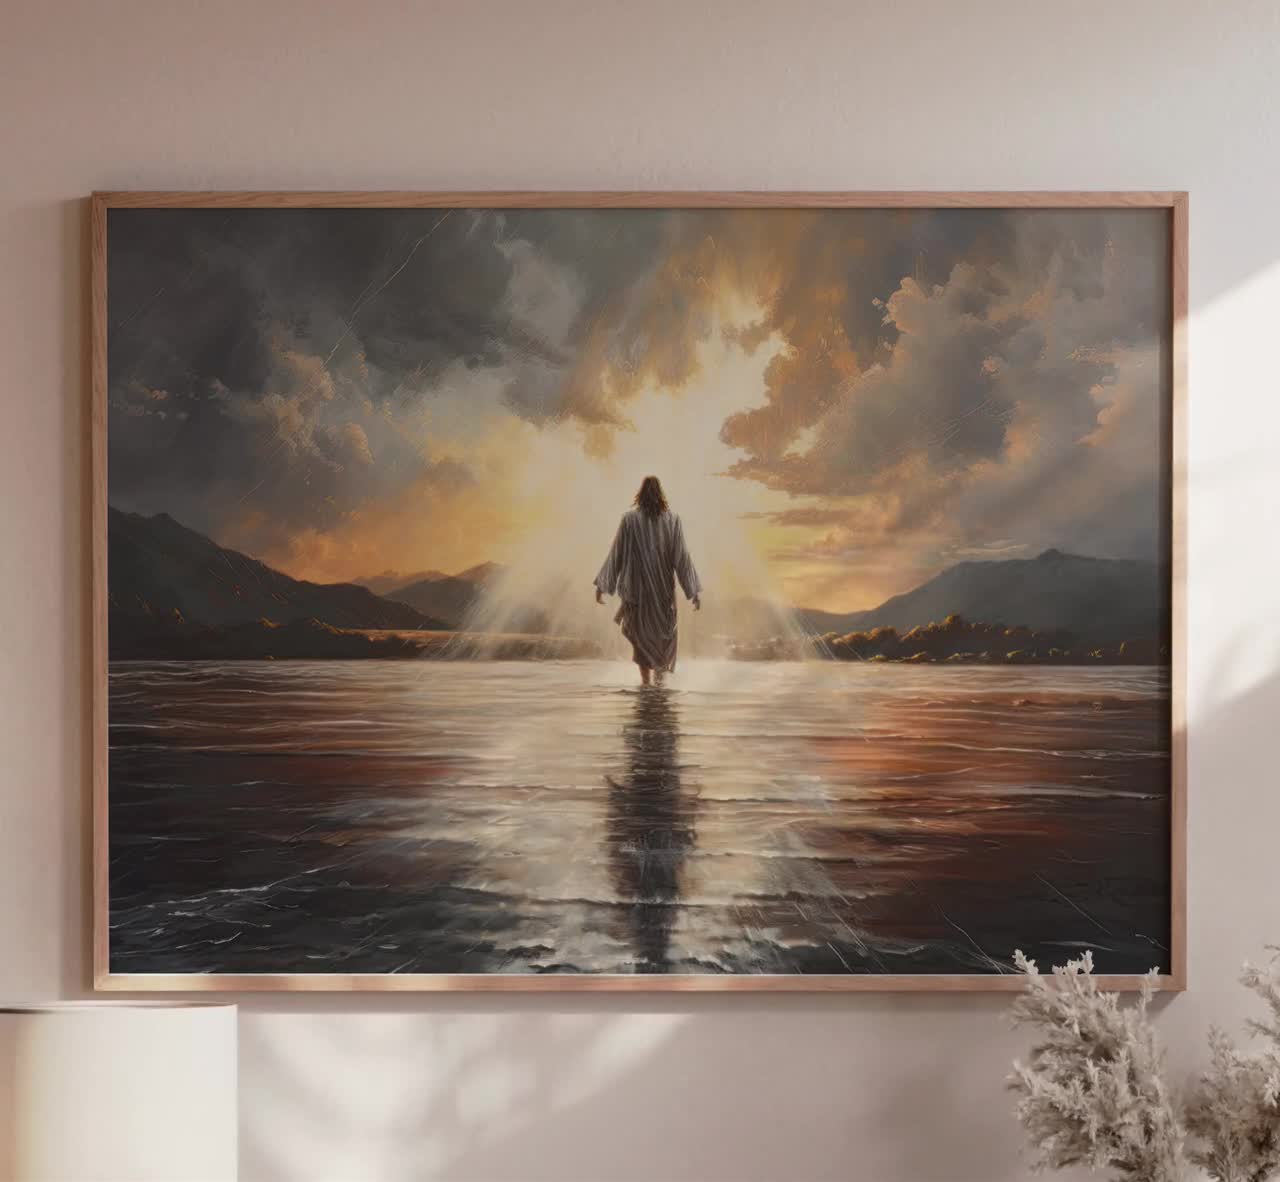 Etsy Wall Jesus Print, on Print Holy Religious Religious Painting, Matte - Christ Oil Decor, Art, Art Walking Wall Christian Water Clouds Original